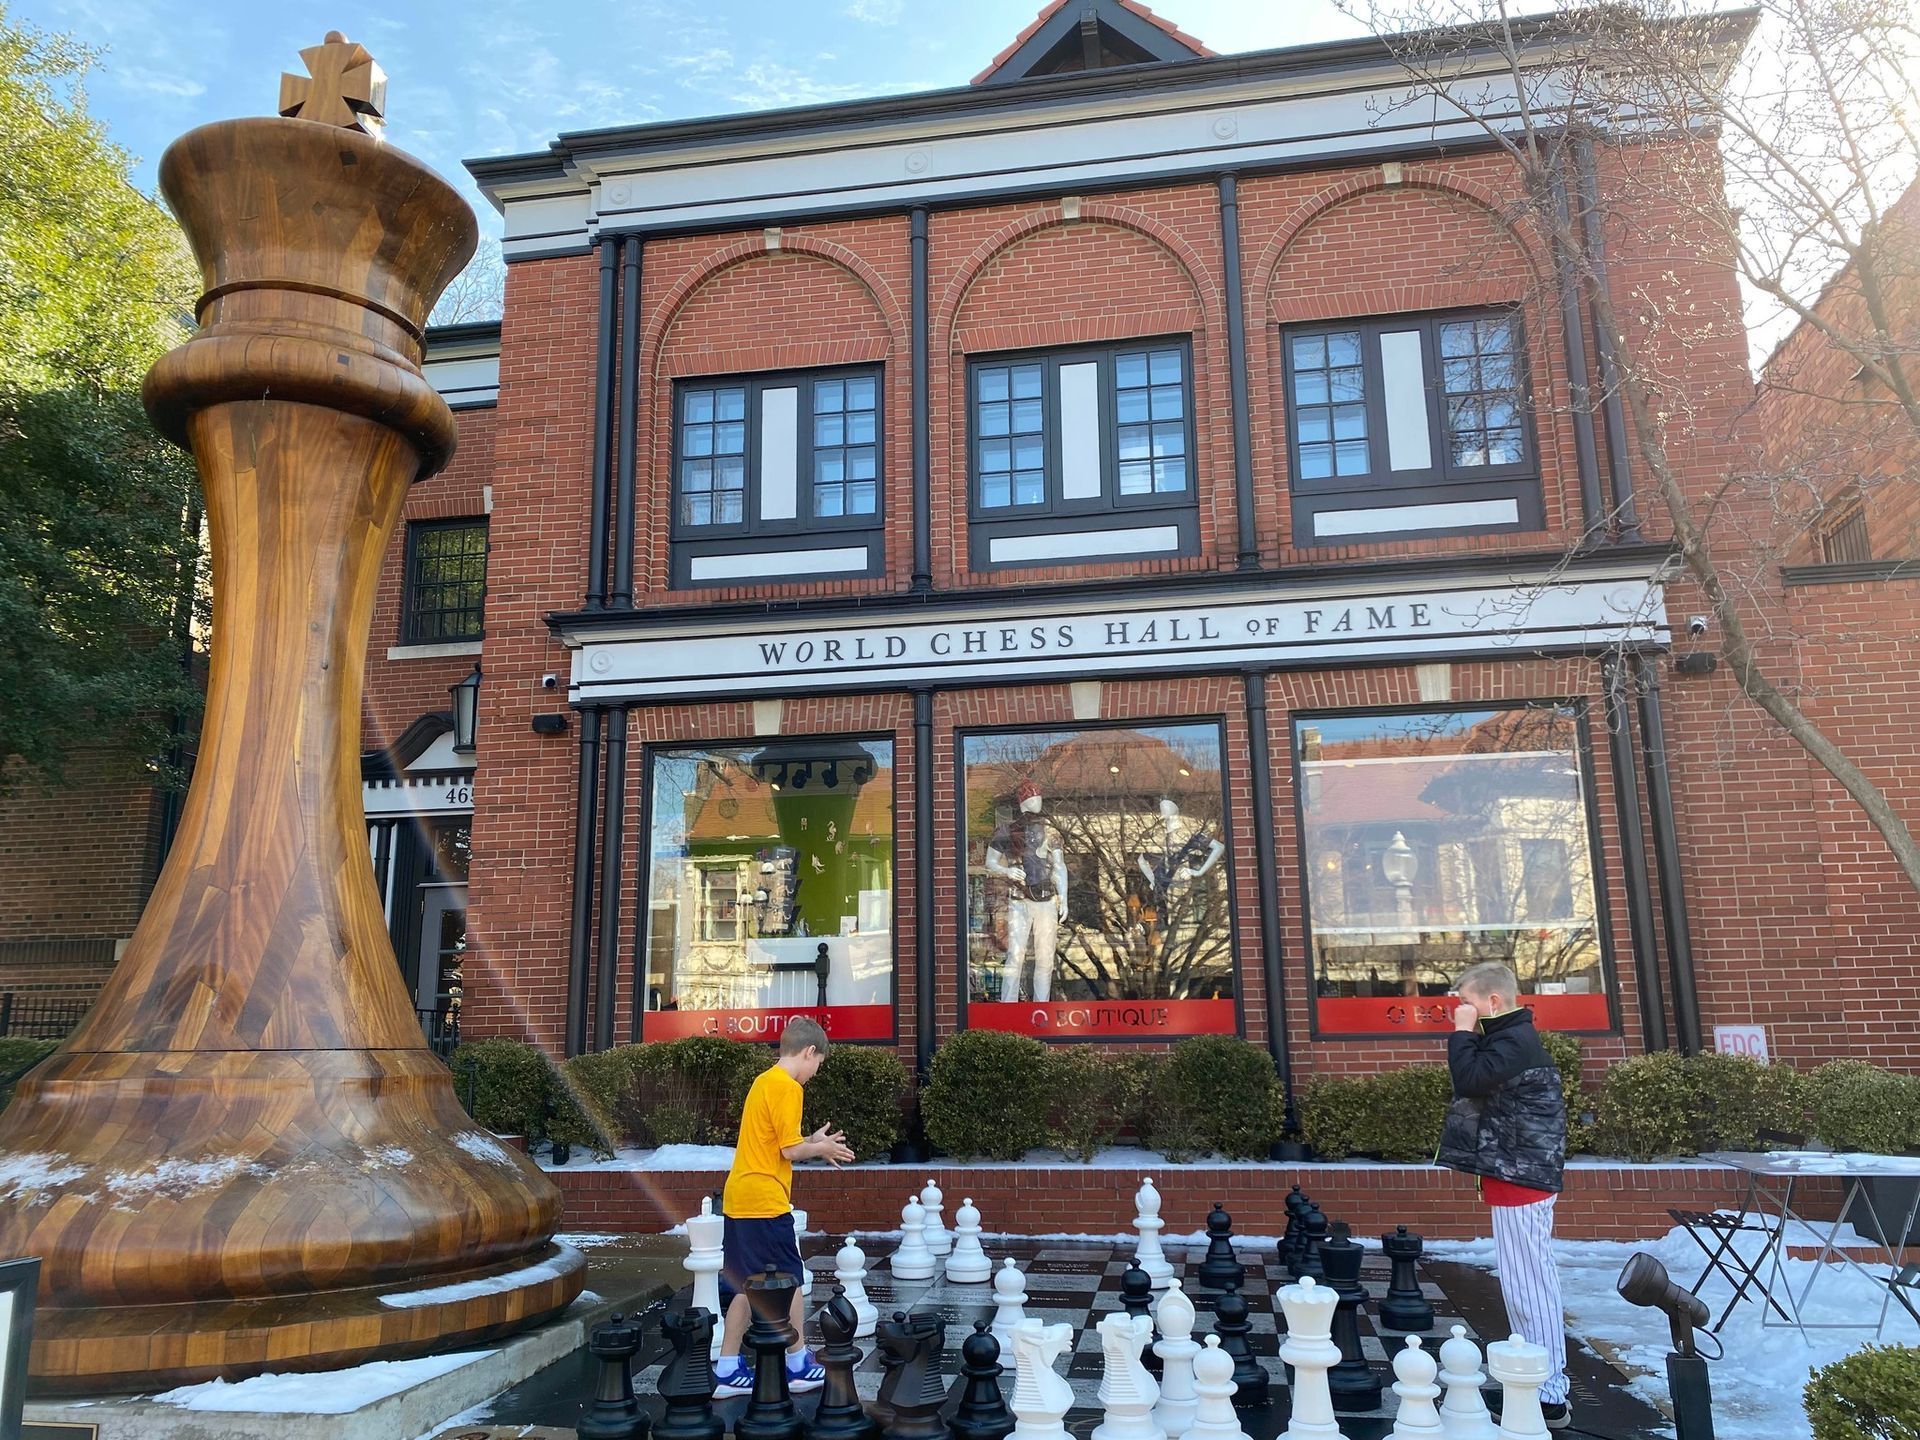 World’s Largest Chess Piece: world record in St. Louis, Missouri